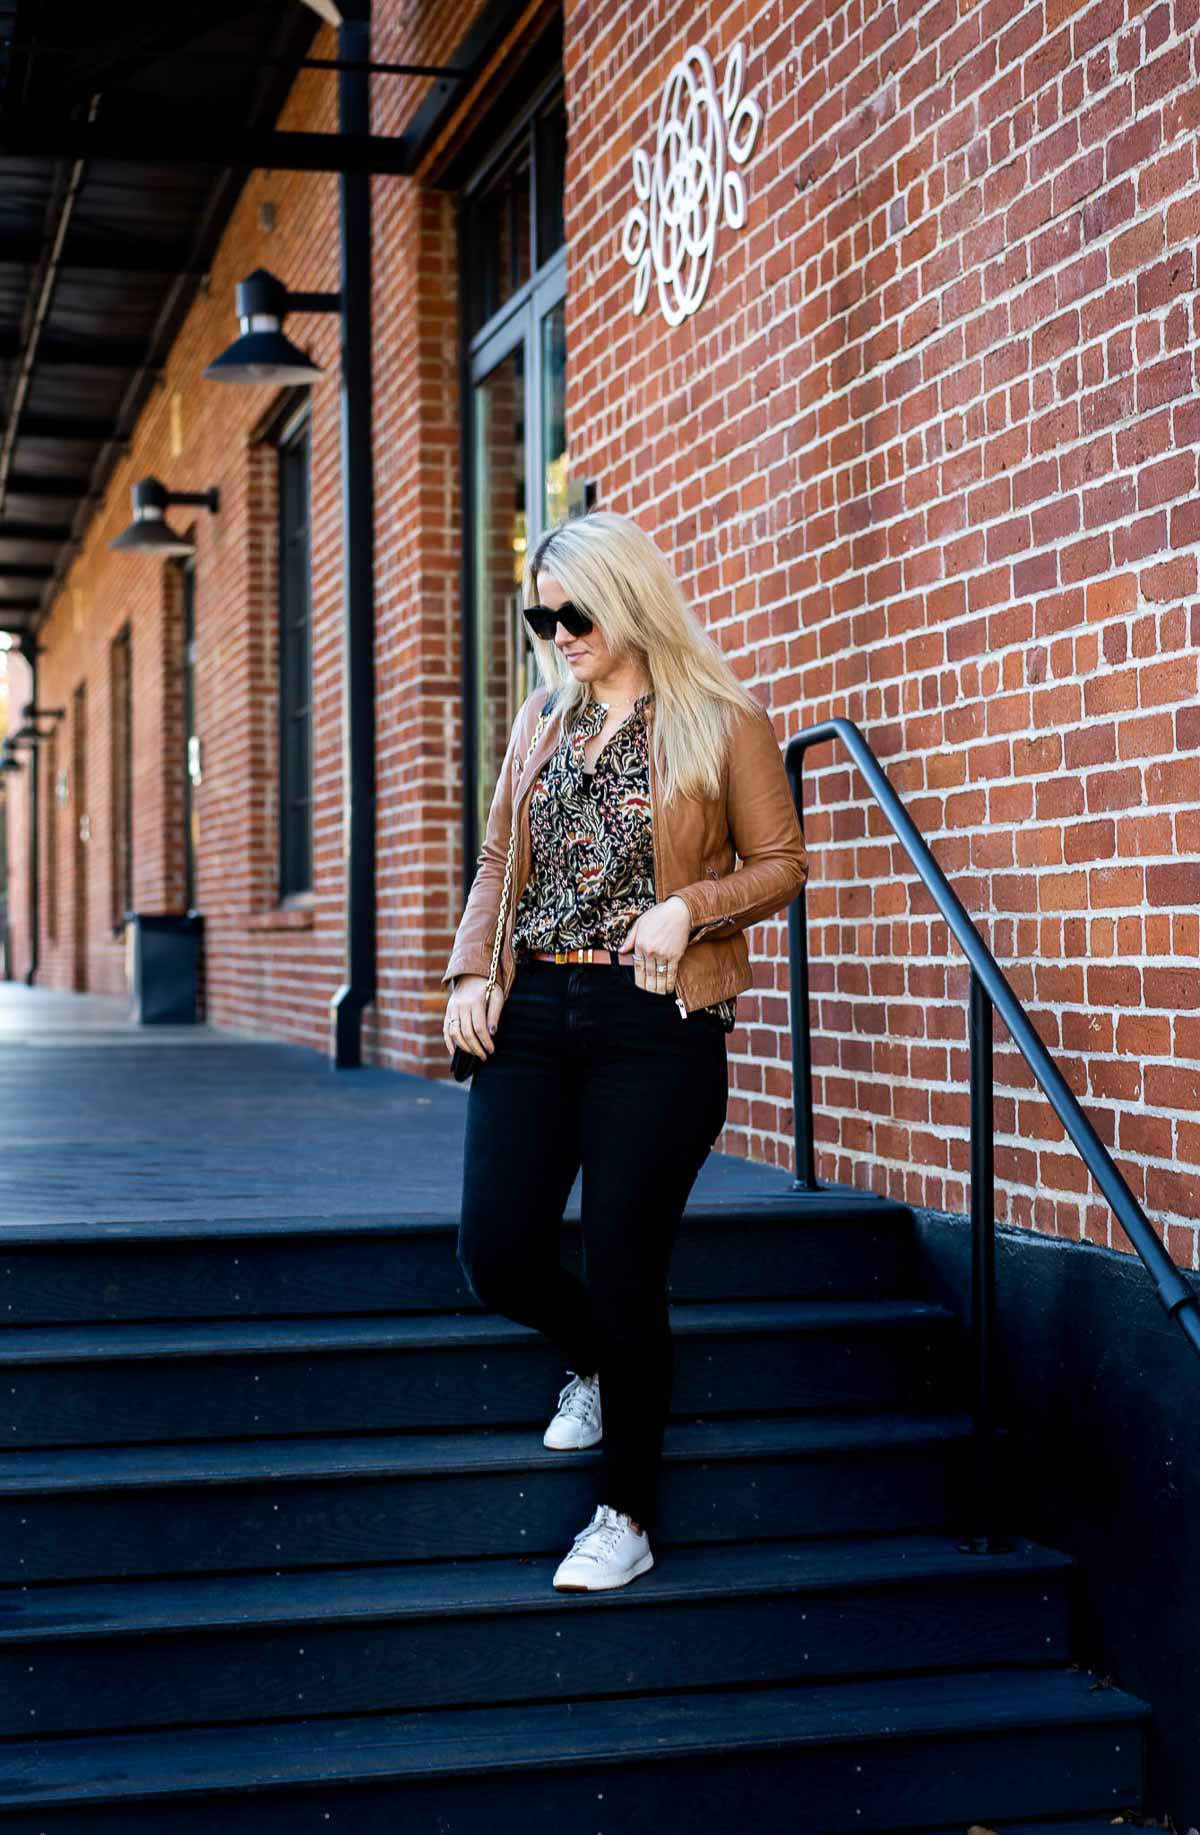 Black Wash Jeans Outfit with floral print blouse and tan leather jacket